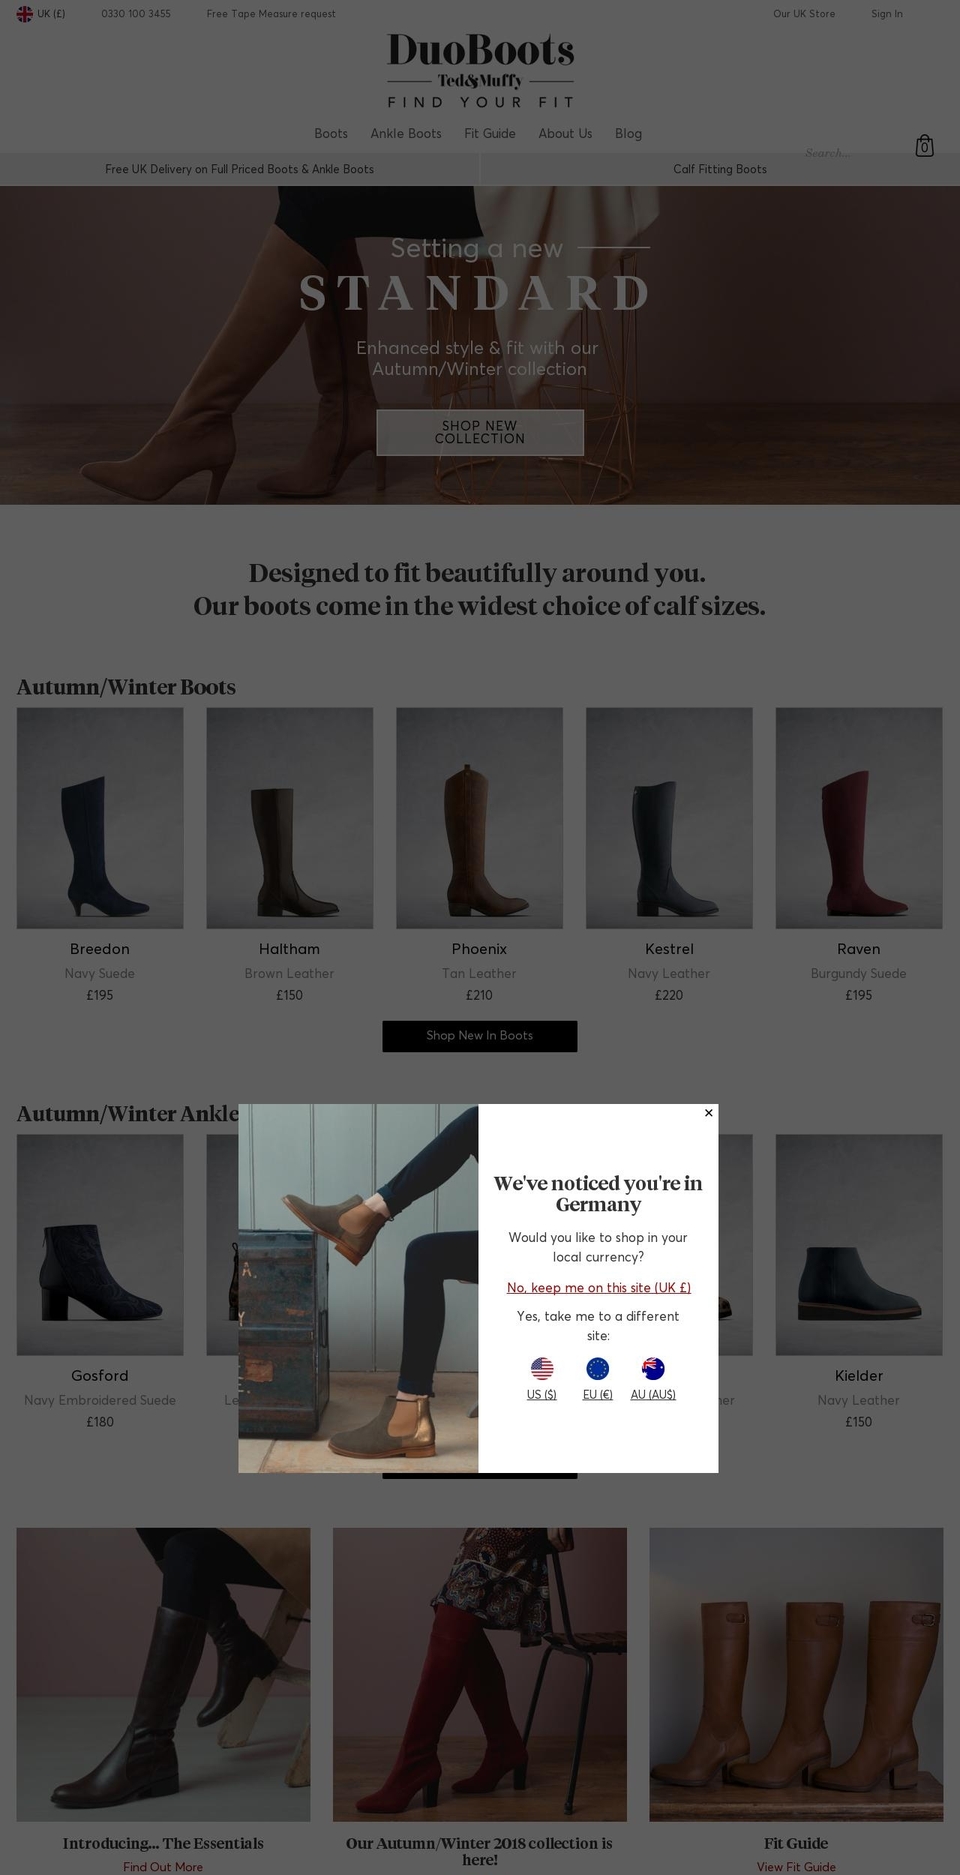 DuoBoots GBP V4.2 Shopify theme site example duoboots.international